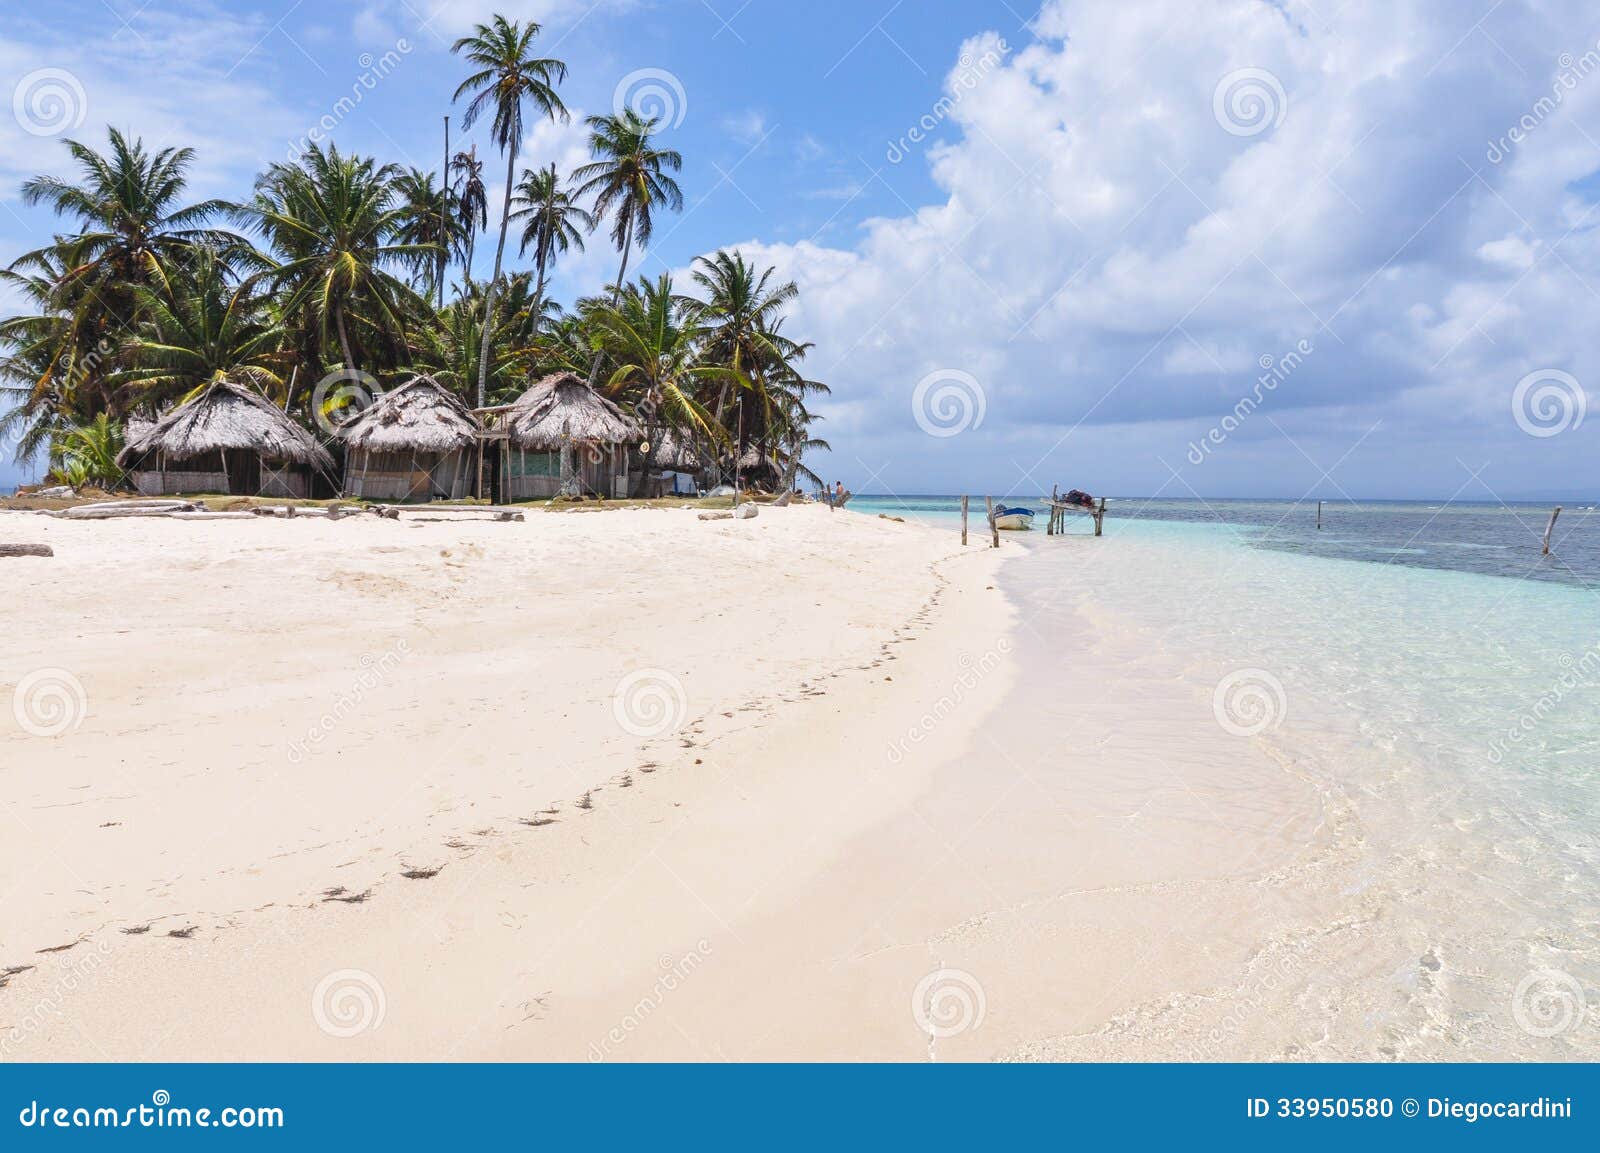 perfect unspoiled caribbean island with native huts, san blas. panama. central america.